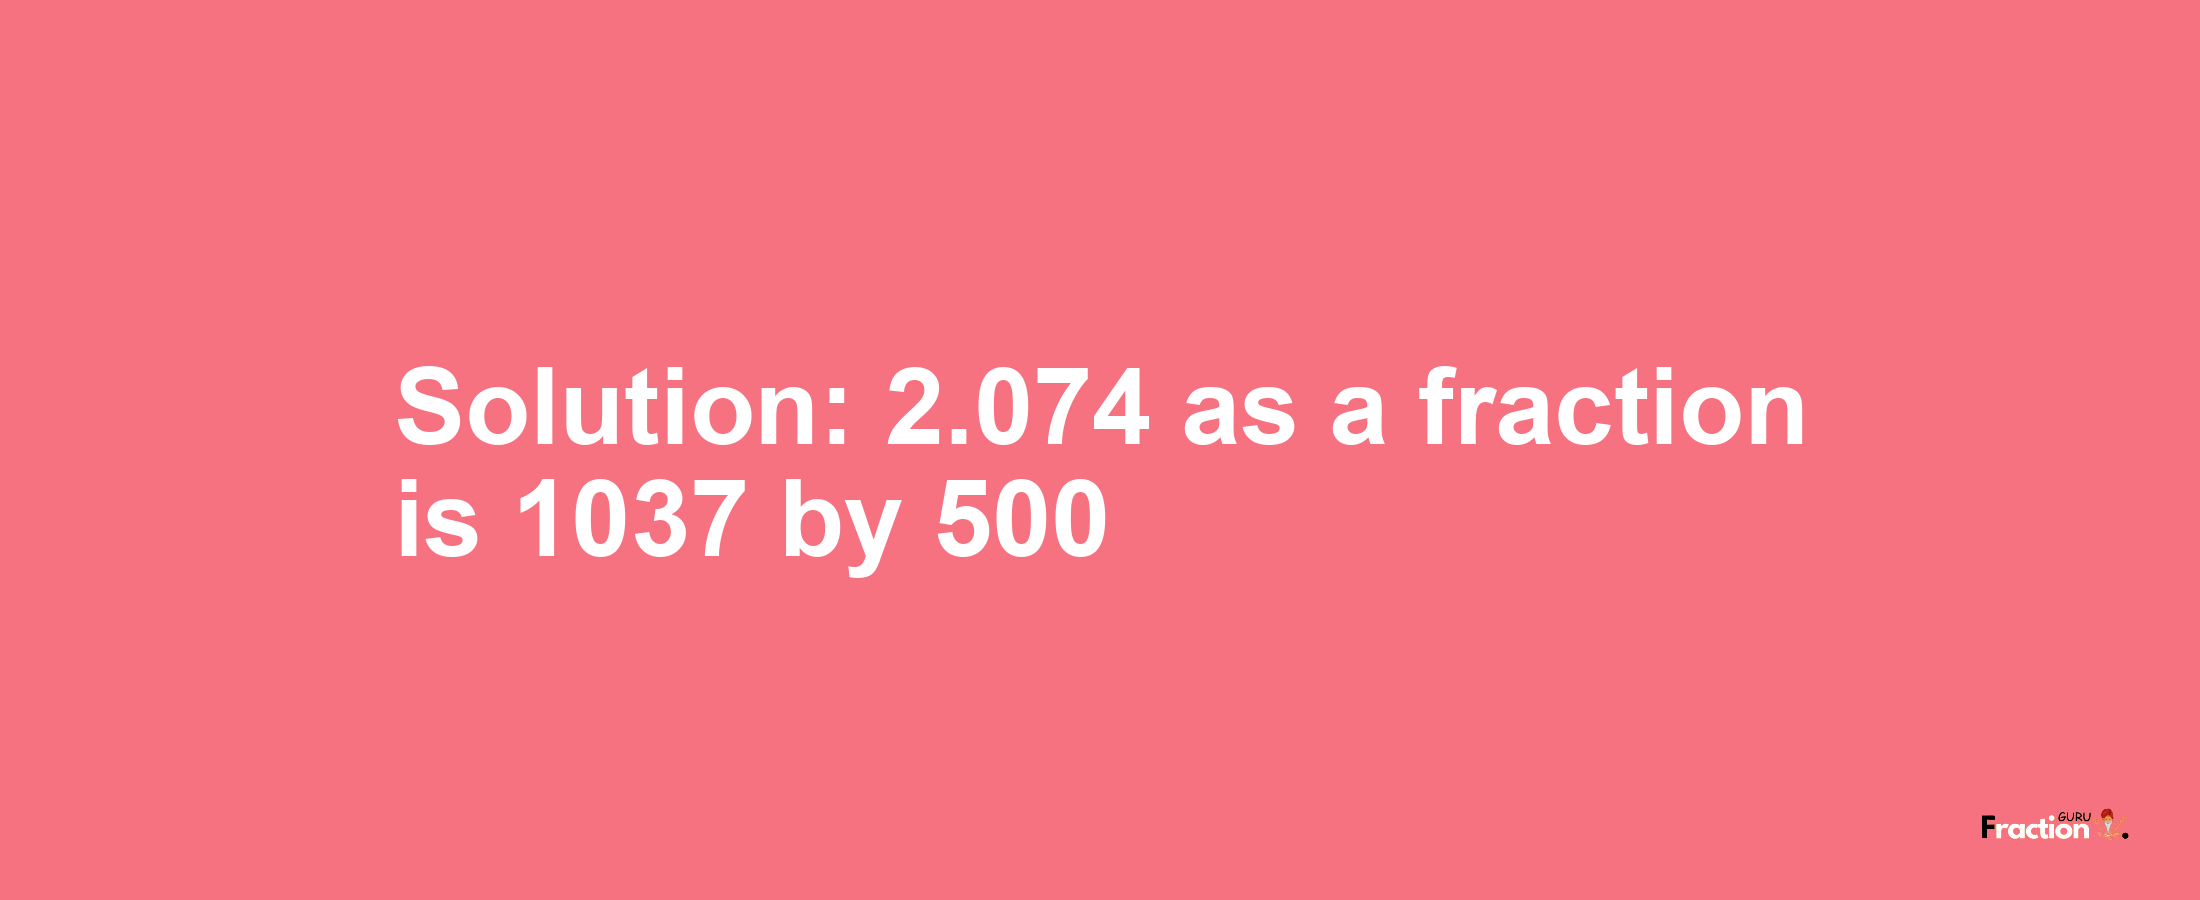 Solution:2.074 as a fraction is 1037/500